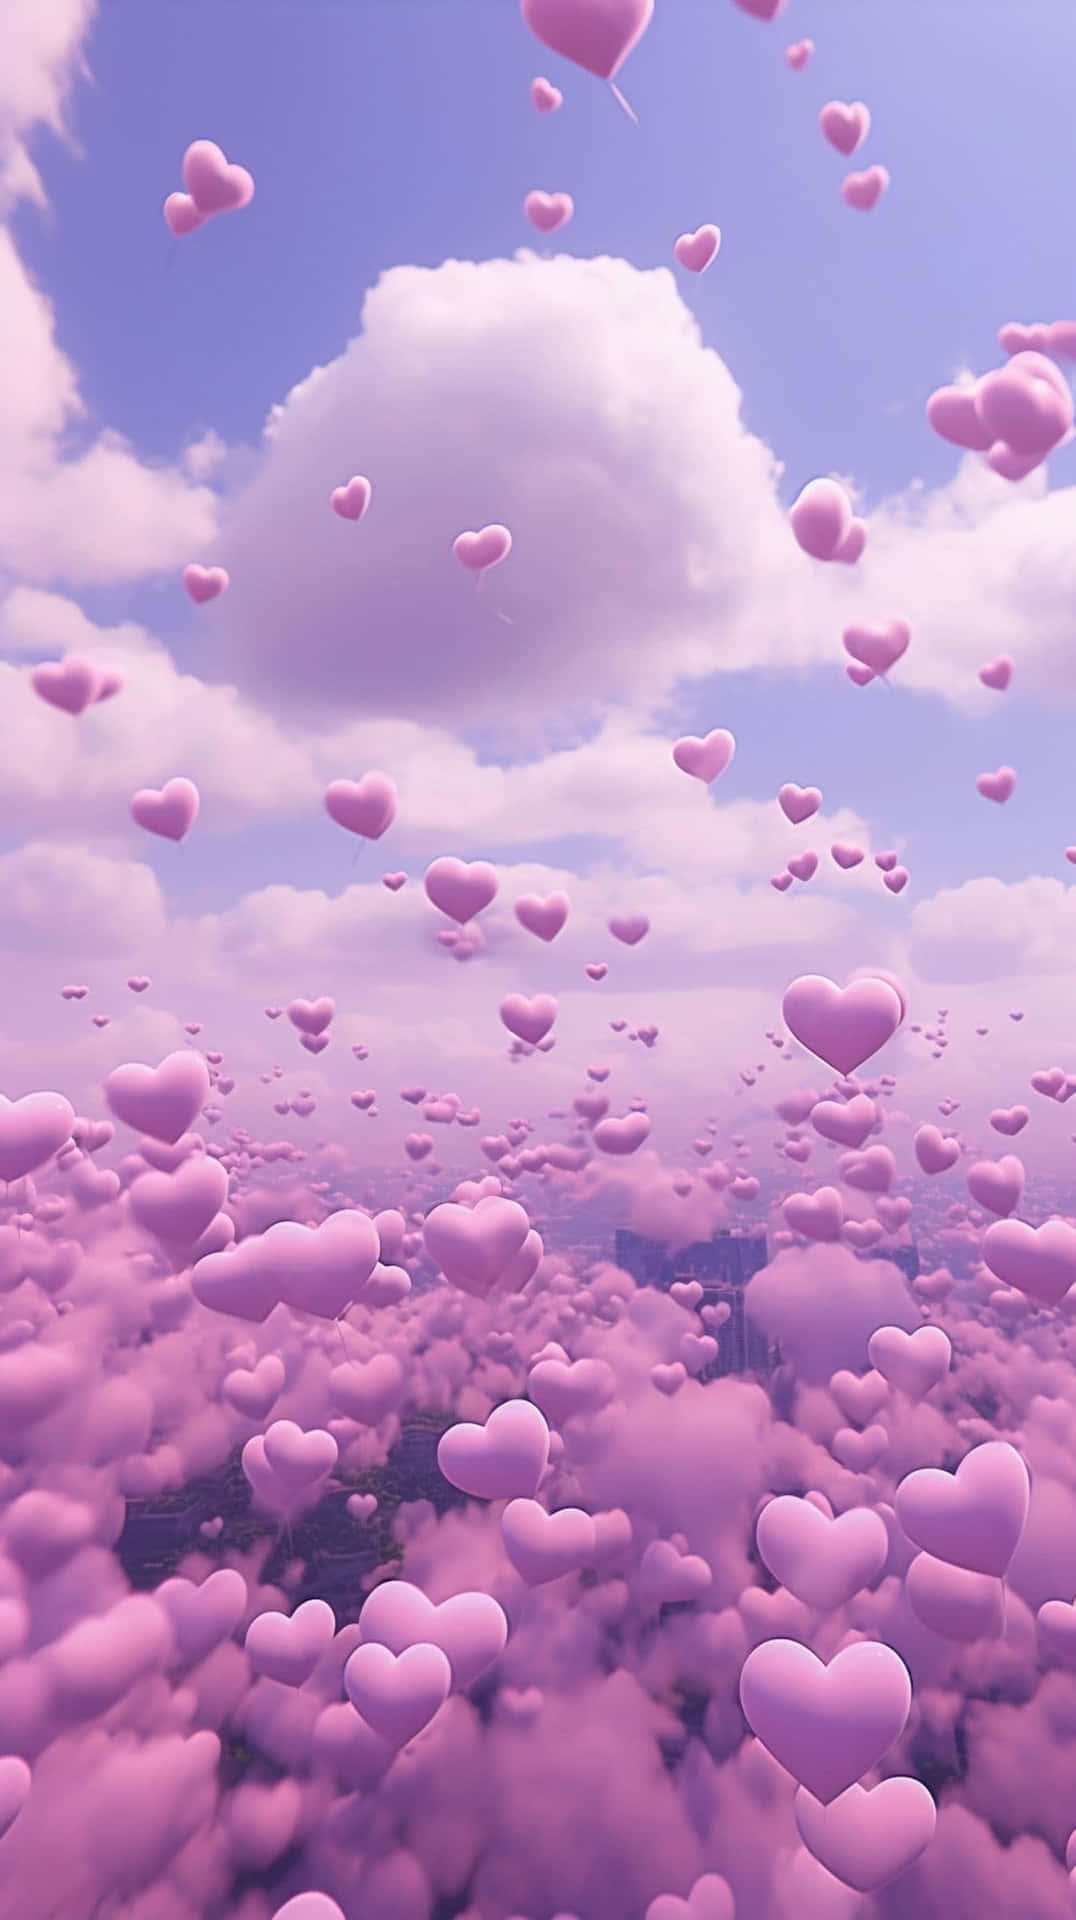 Pink Heart Clouds Aesthetic Wallpaper